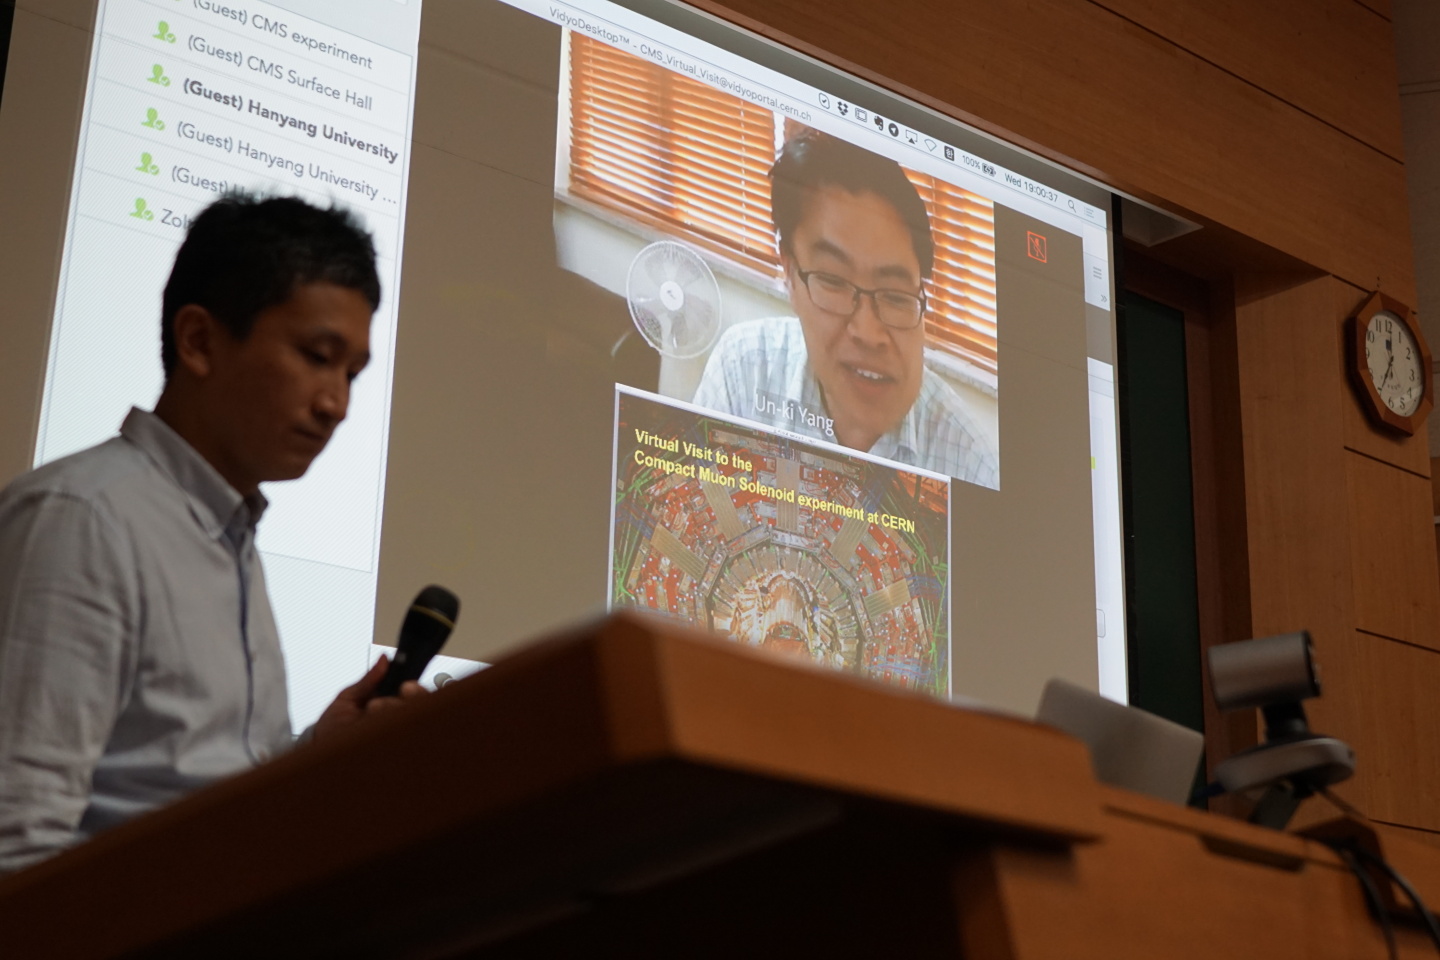 Prof. Un-Ki Yang, CMS senior scientist from South Korea, welcomed students to the CMS virtual visit 